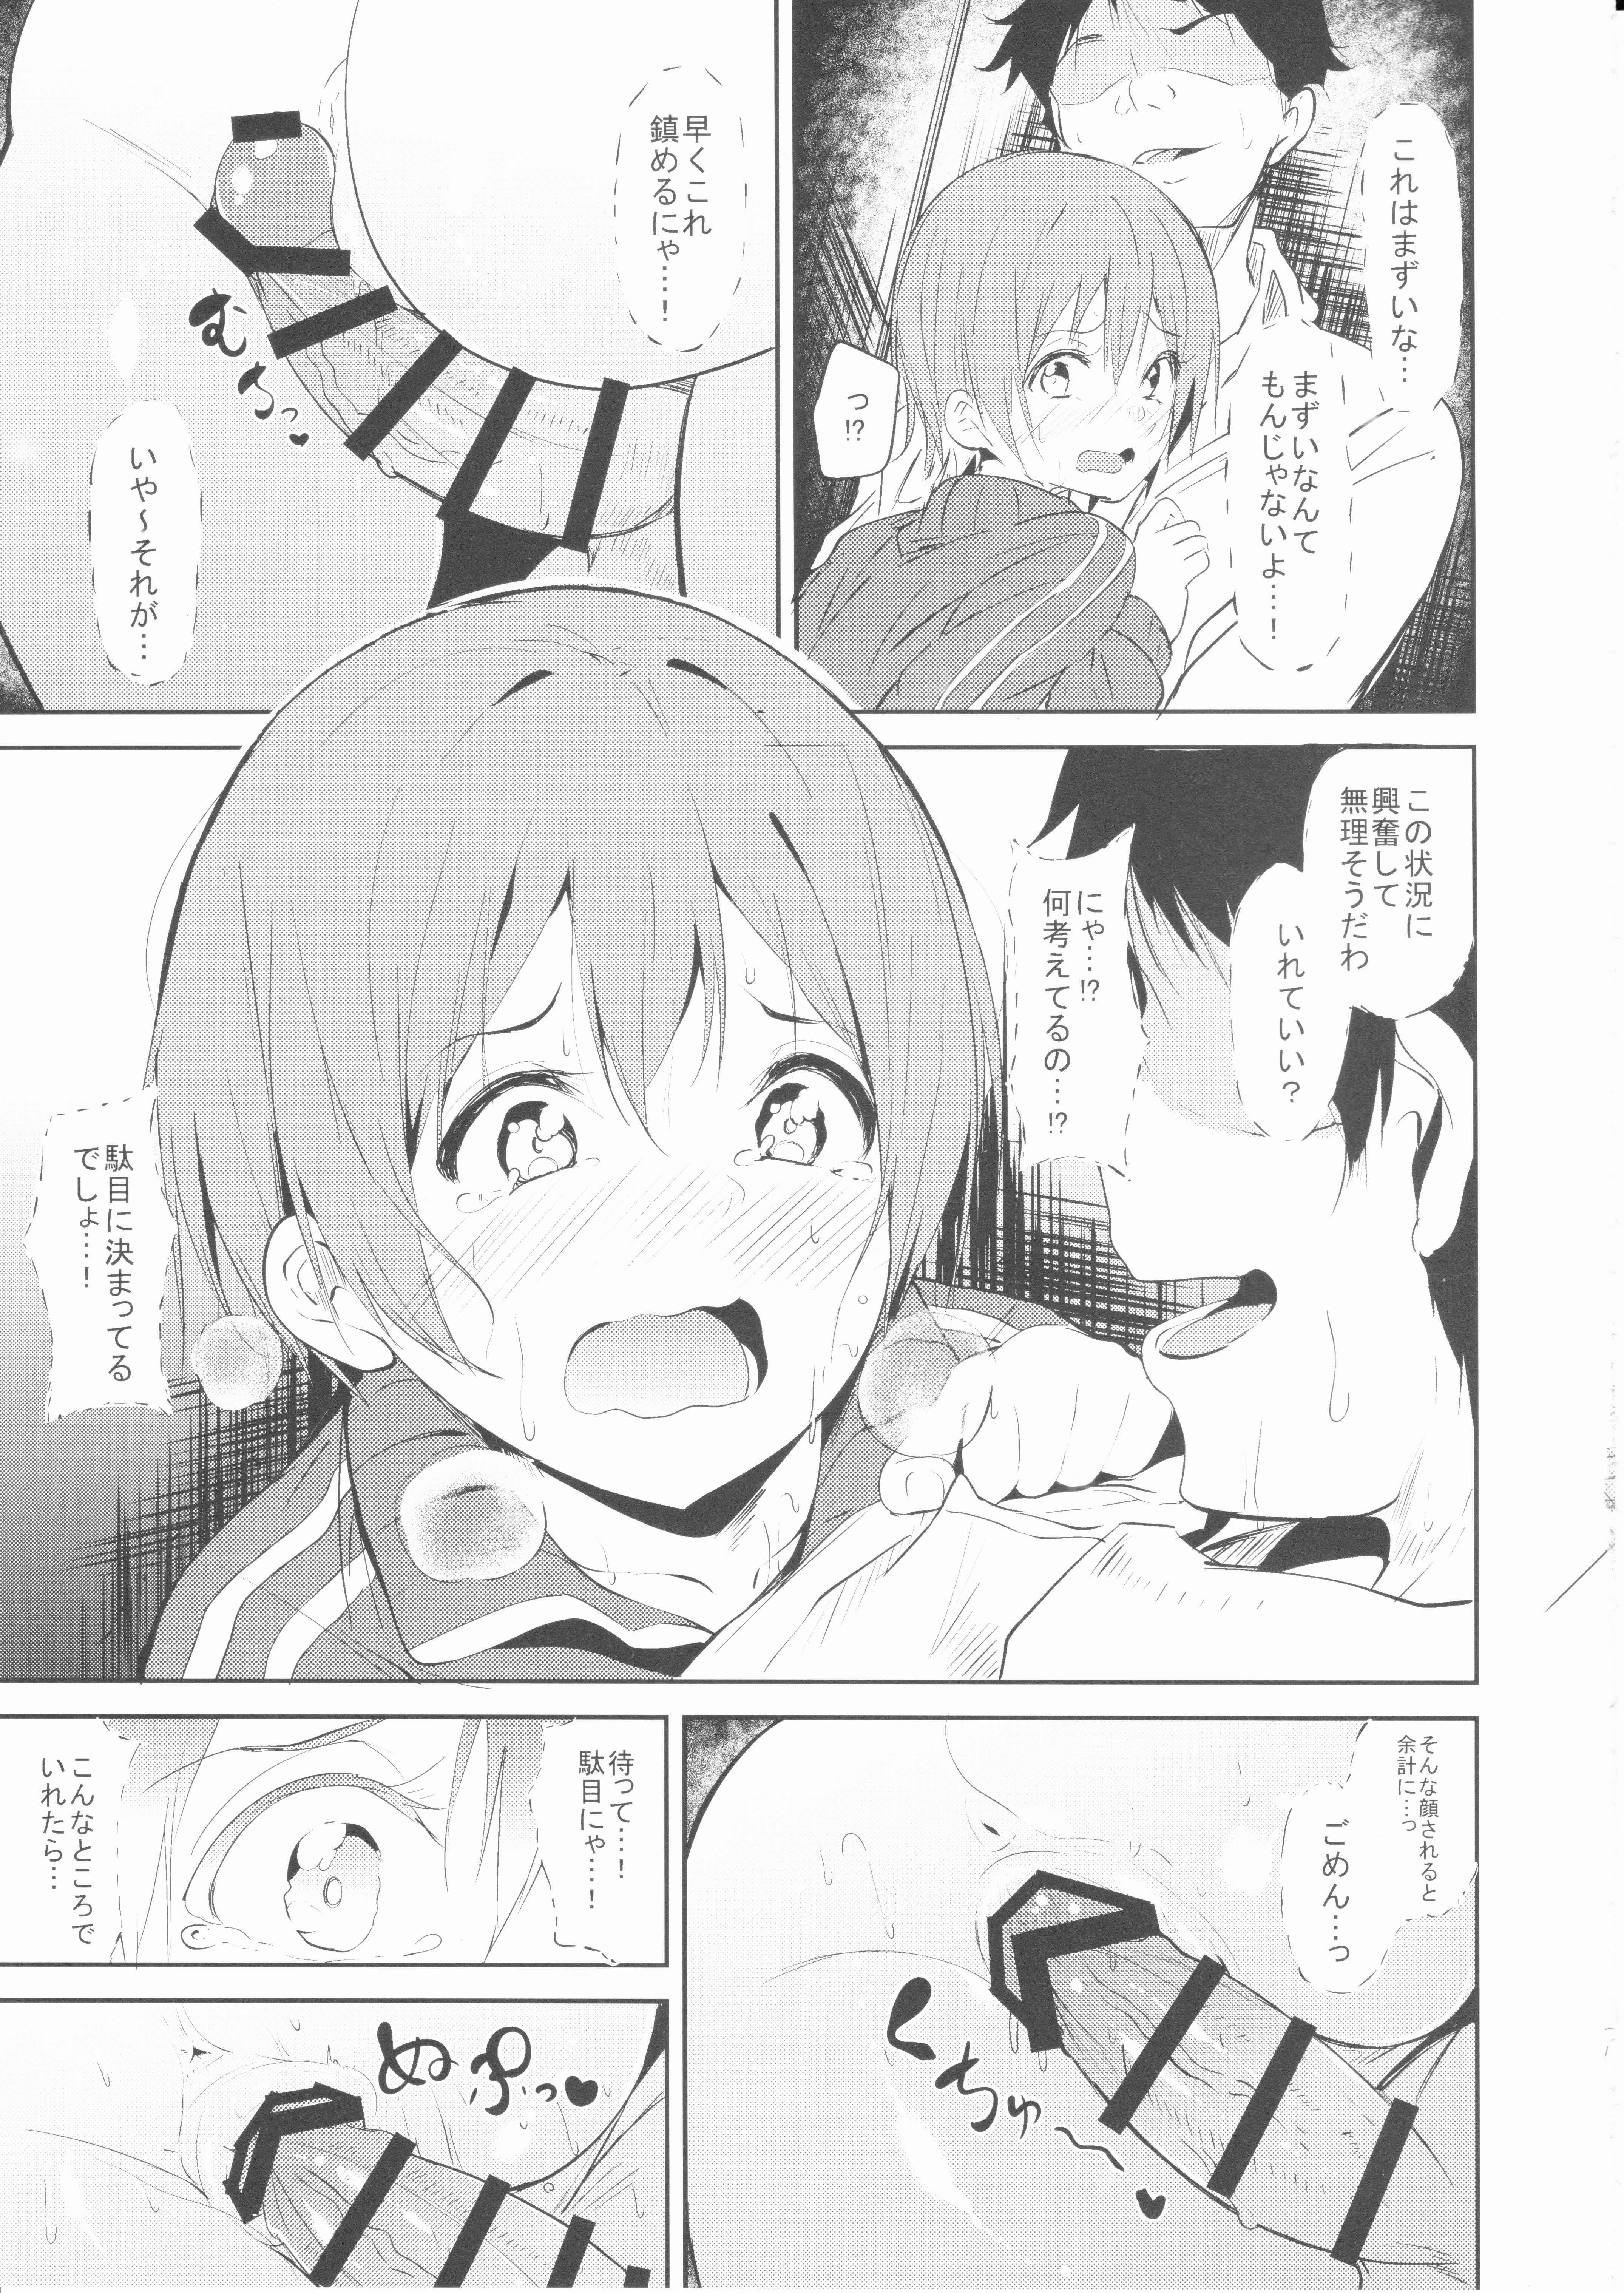 Swallowing CHARM RING - Love live 18 Year Old - Page 6